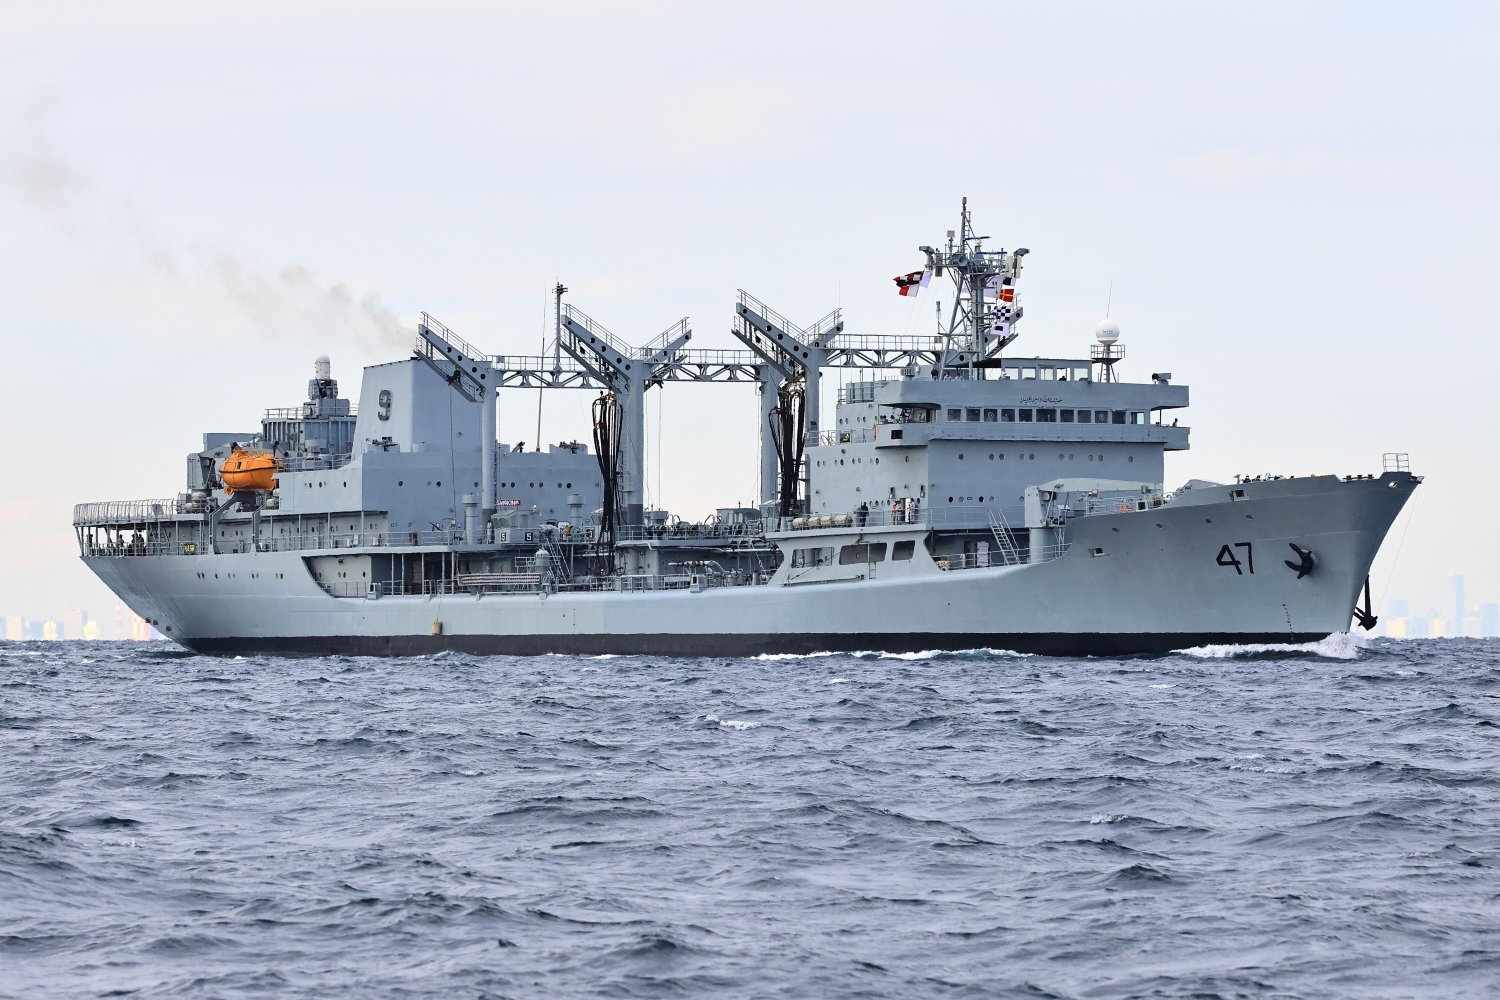 PAKISTAN NAVY SHIP NASR REACHES TURKIYE AFTER COMPLETING RELIEF MISSION IN SYRIA